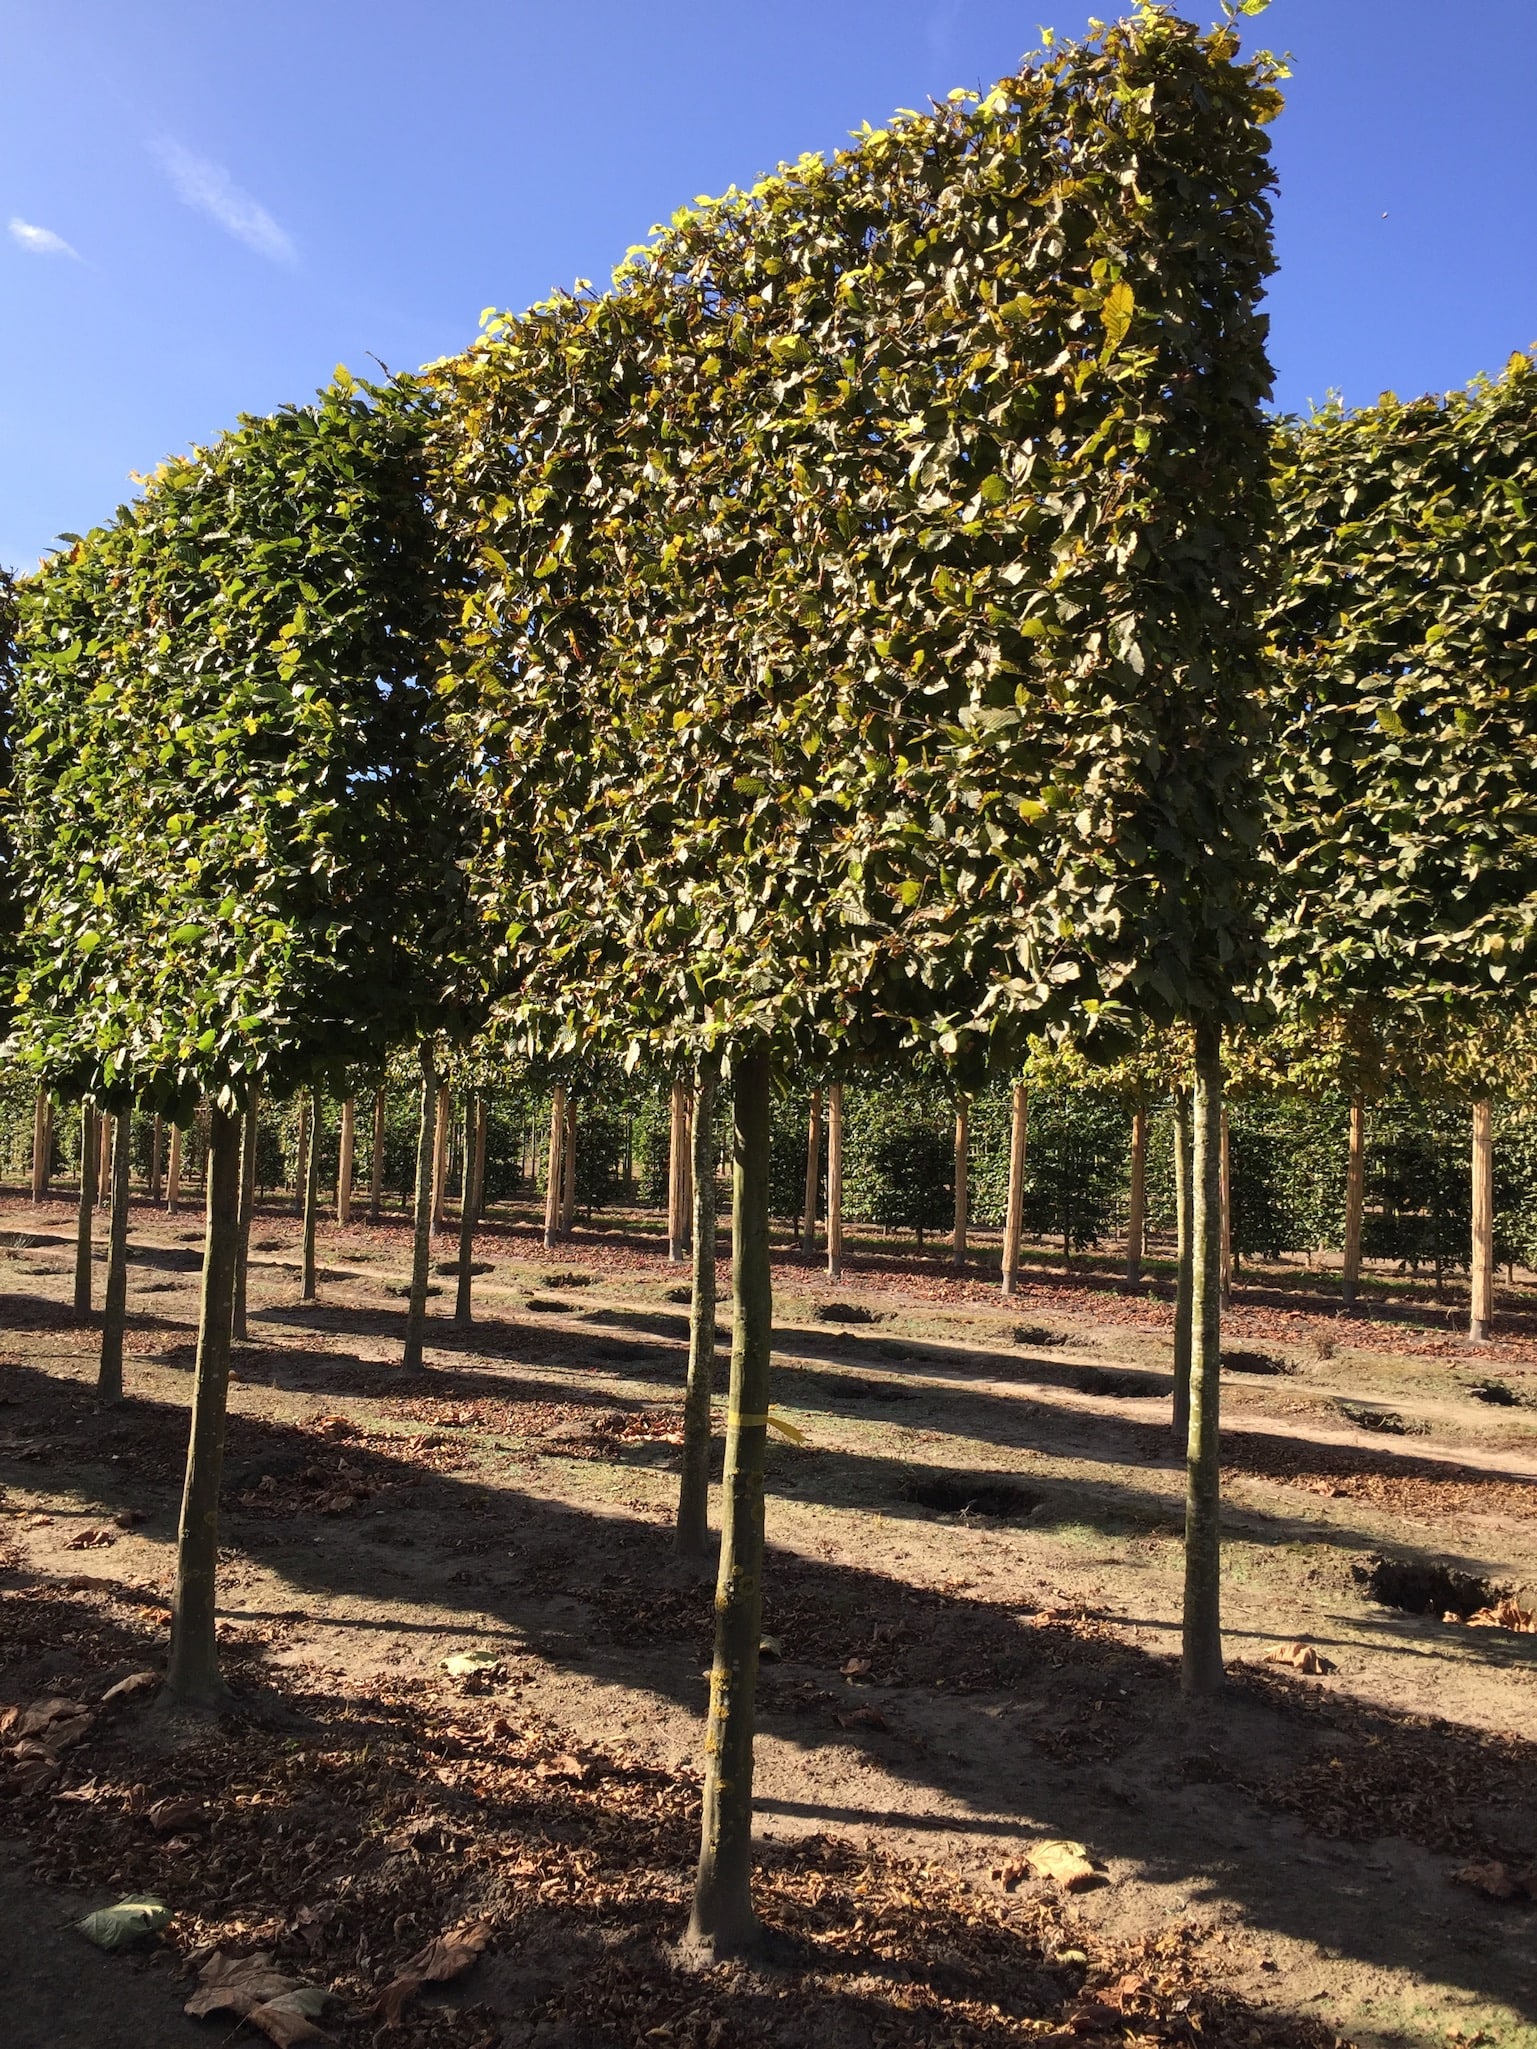 rows of pleached trees